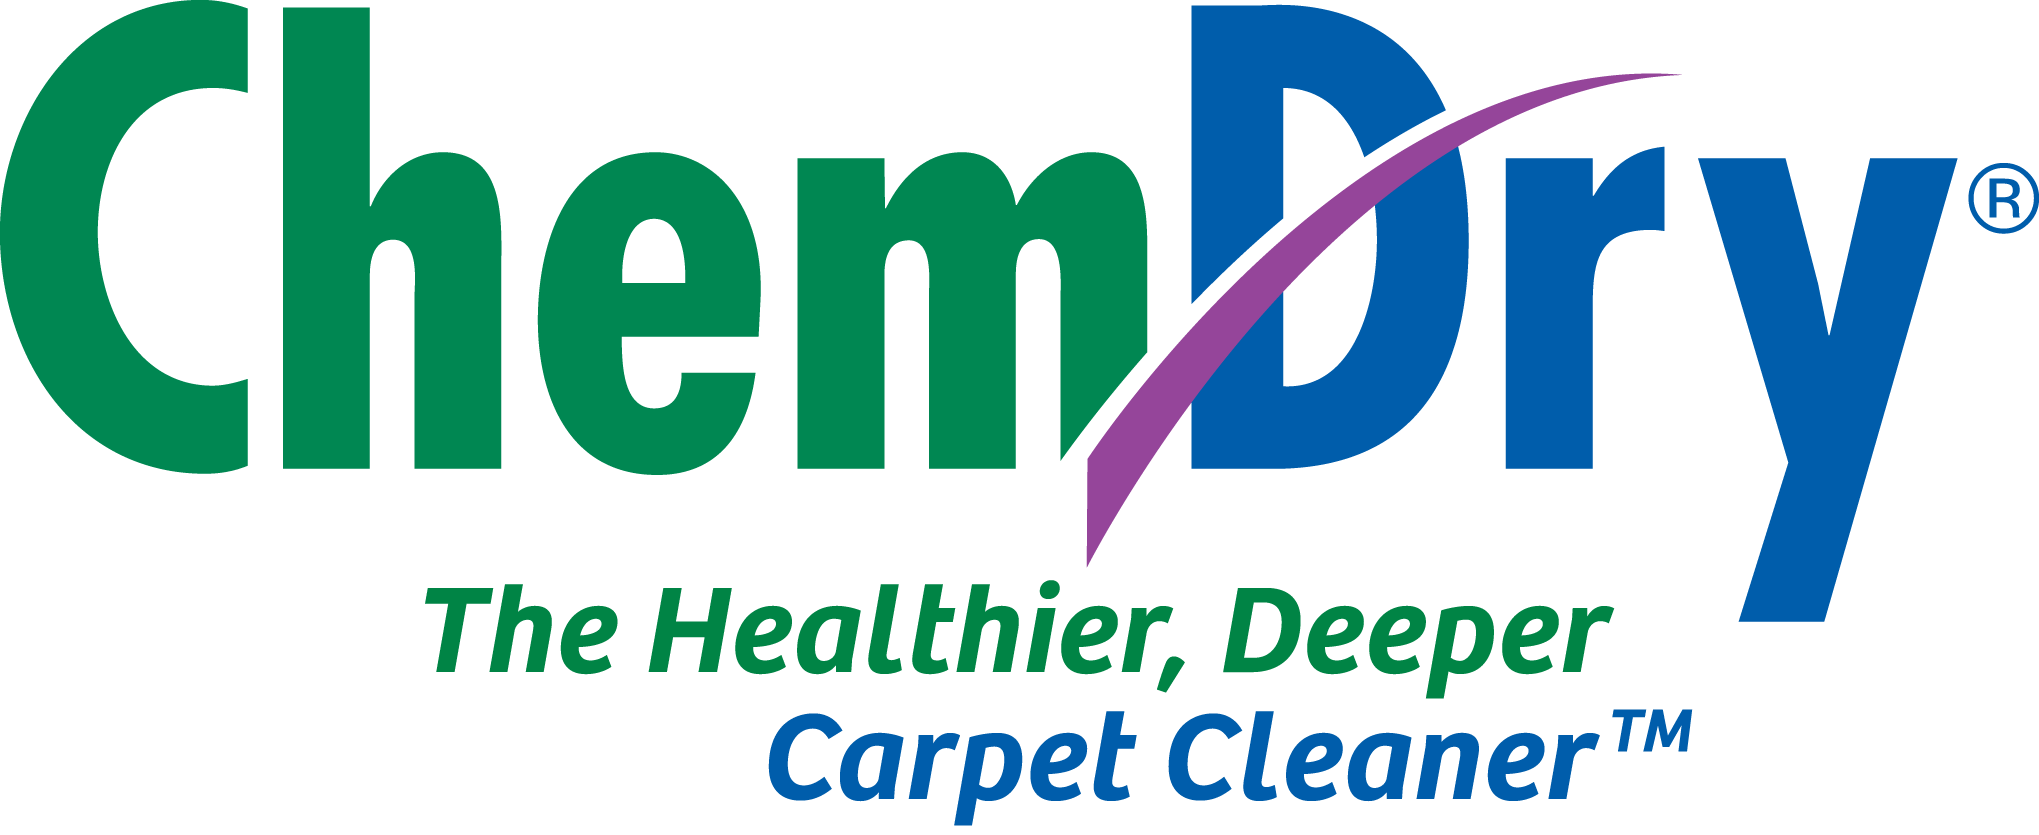 Empire Chem-dry carpet cleaning